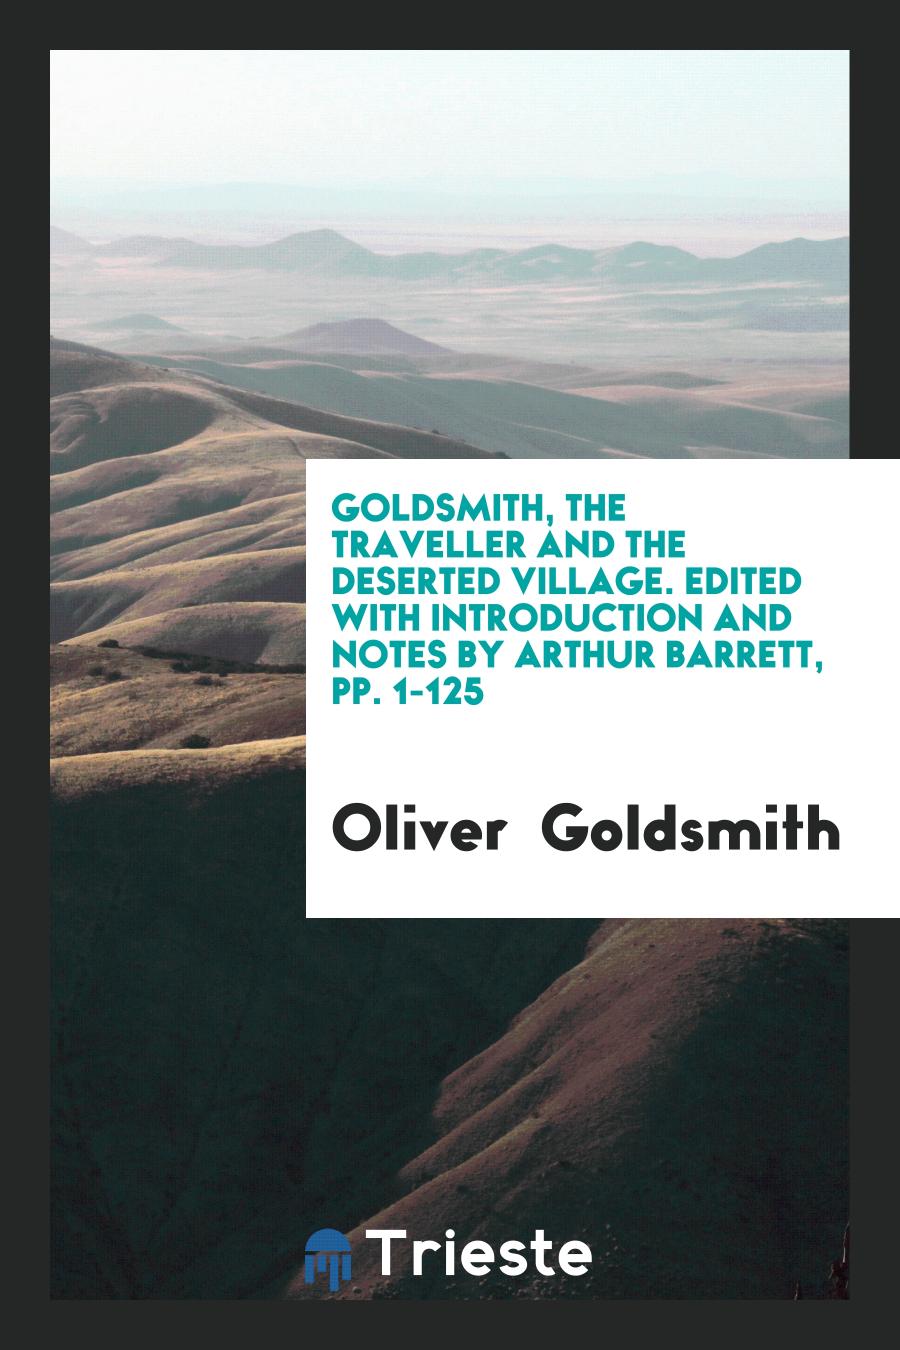 Goldsmith, the Traveller and the Deserted Village. Edited with Introduction and Notes by Arthur Barrett, pp. 1-125